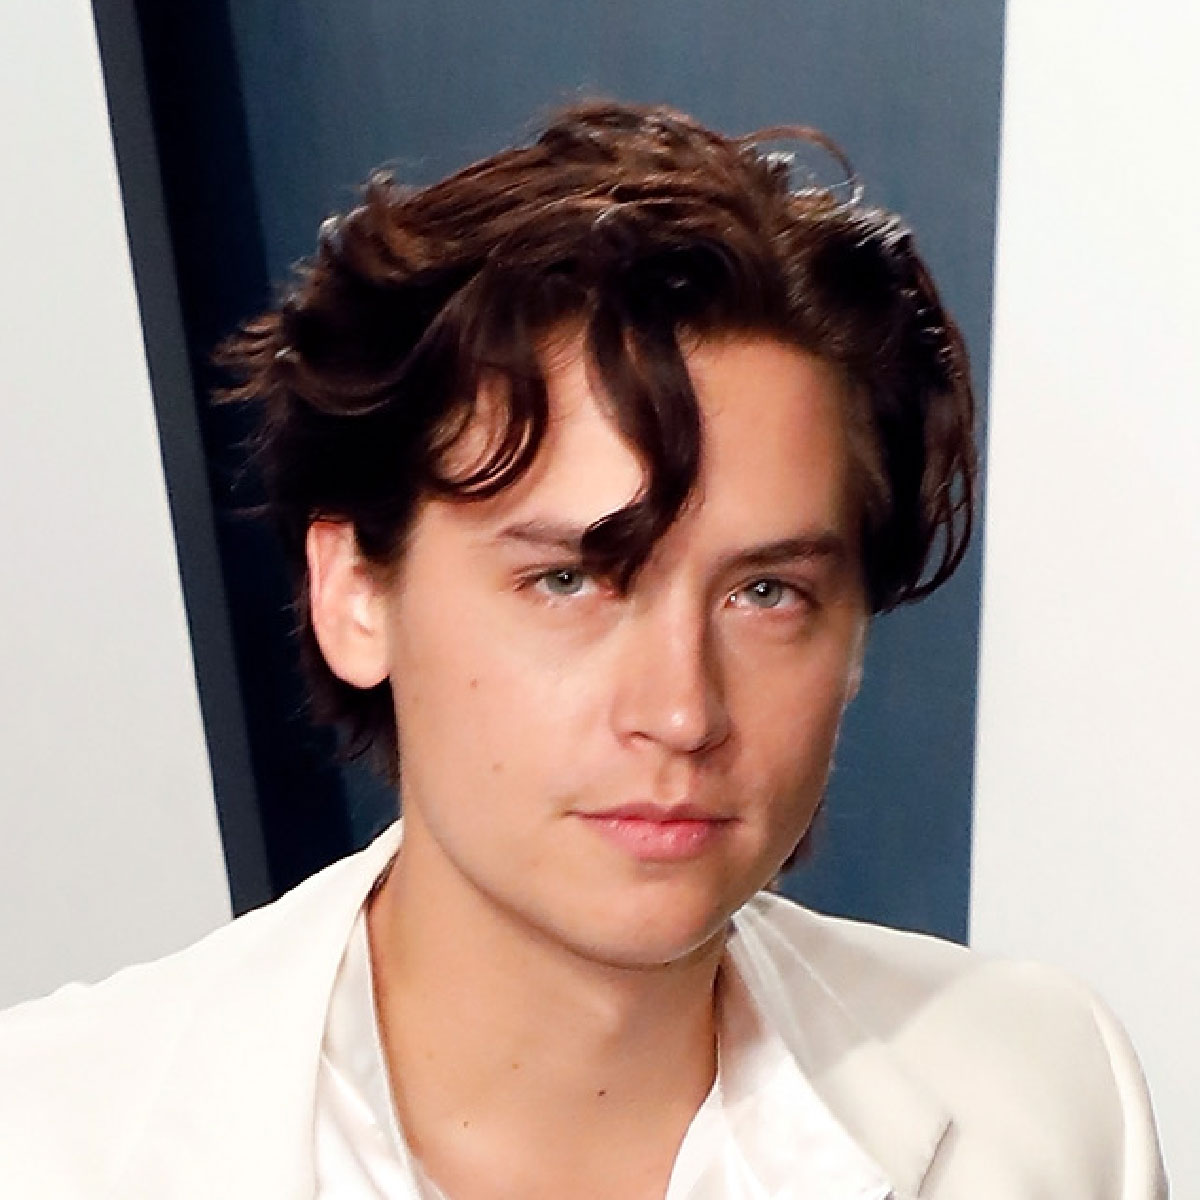 cole-sprouse-grown-out-side-parted-hairstyle